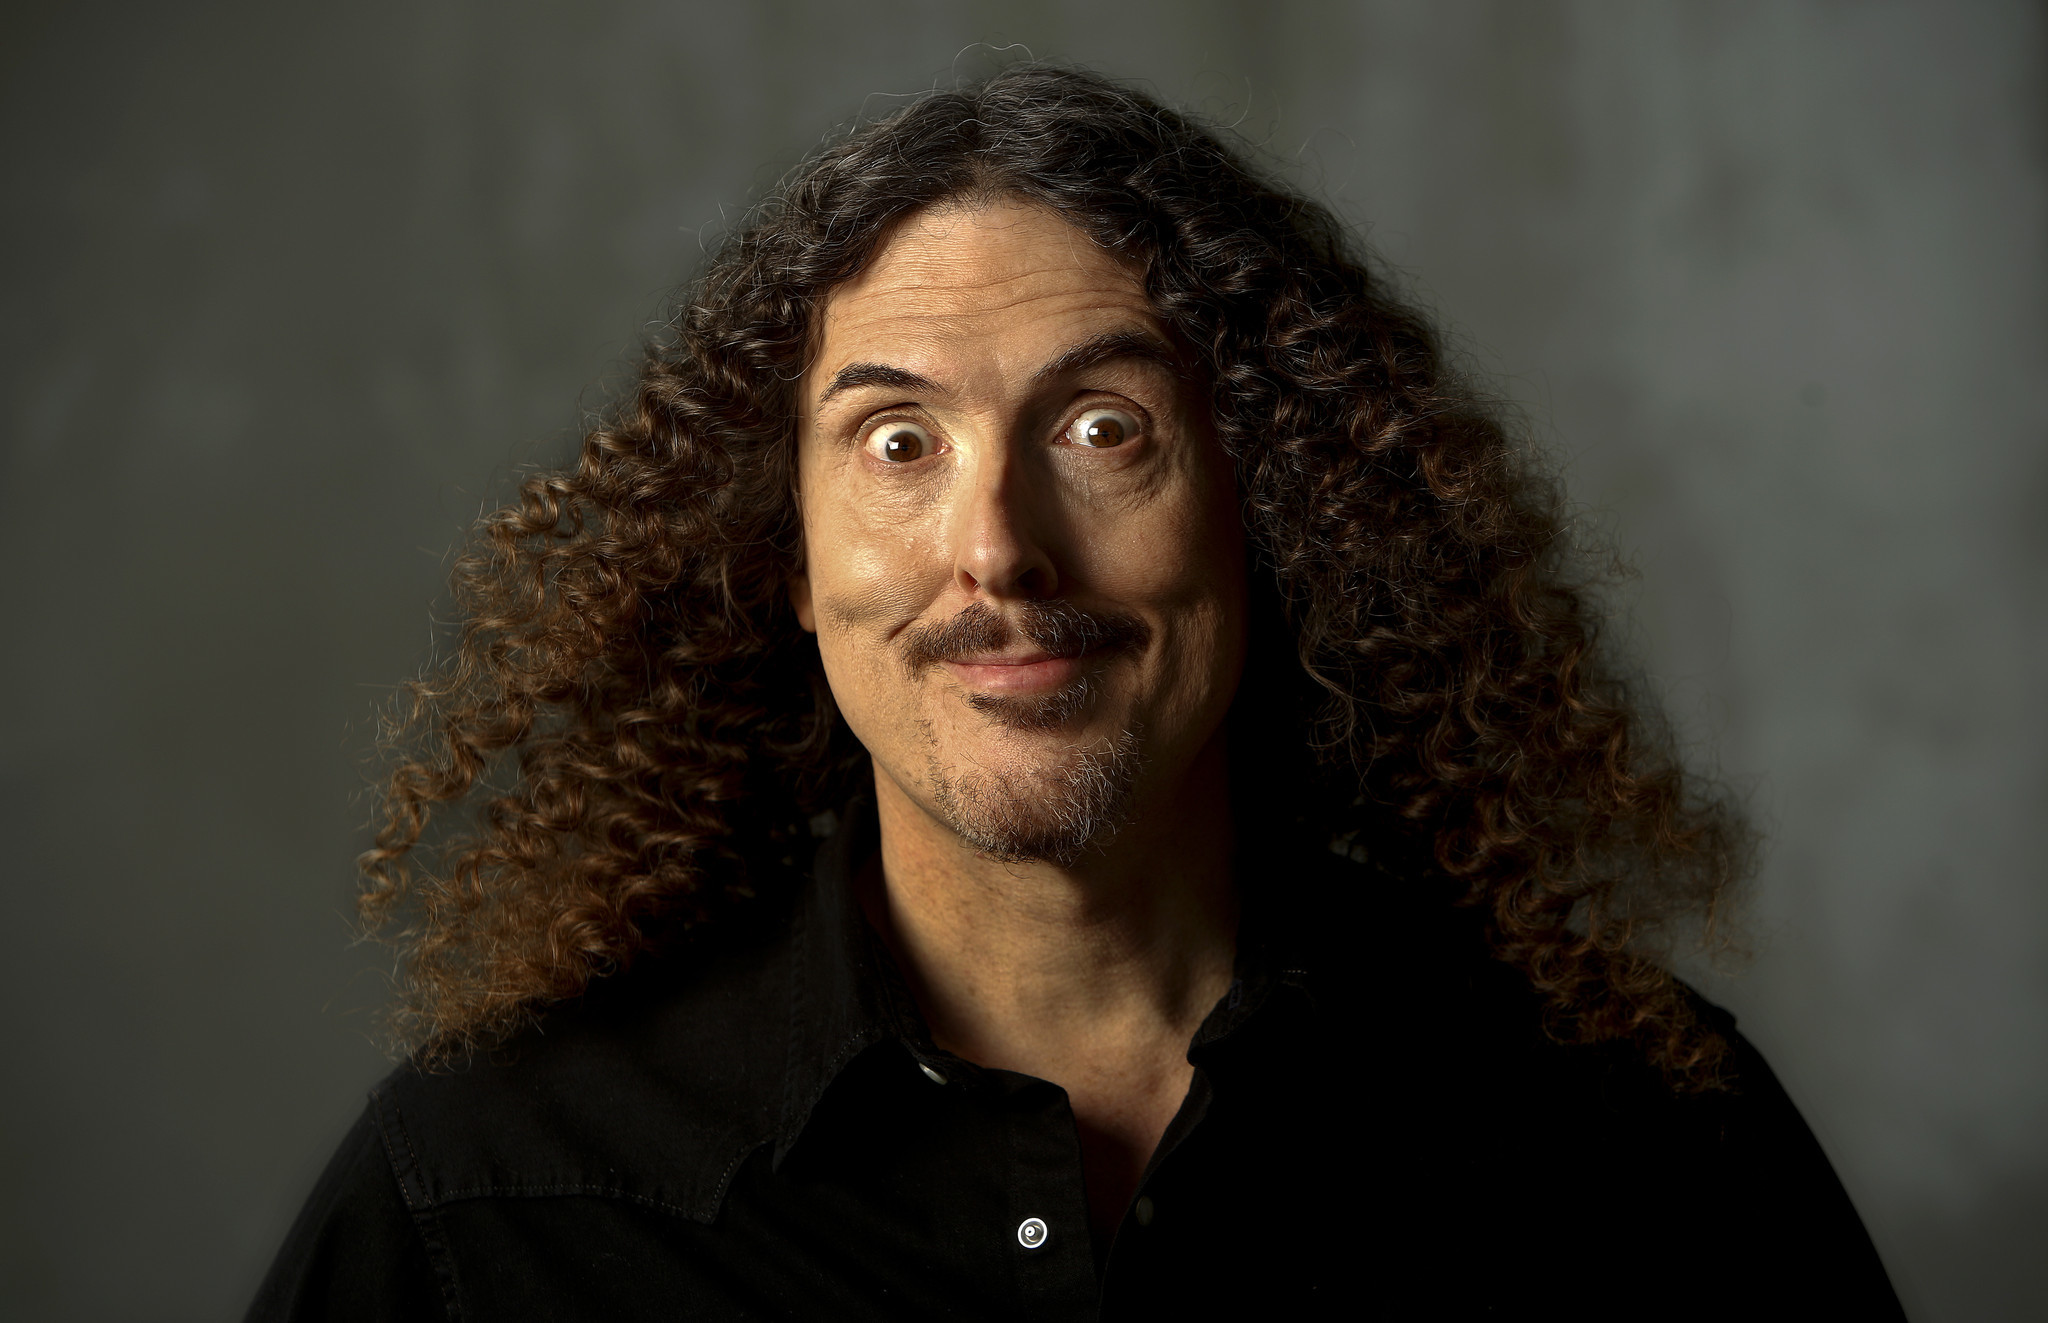 Weird Al Yankovic, young people with autism sing 'Yoda' on telethon - LA Times